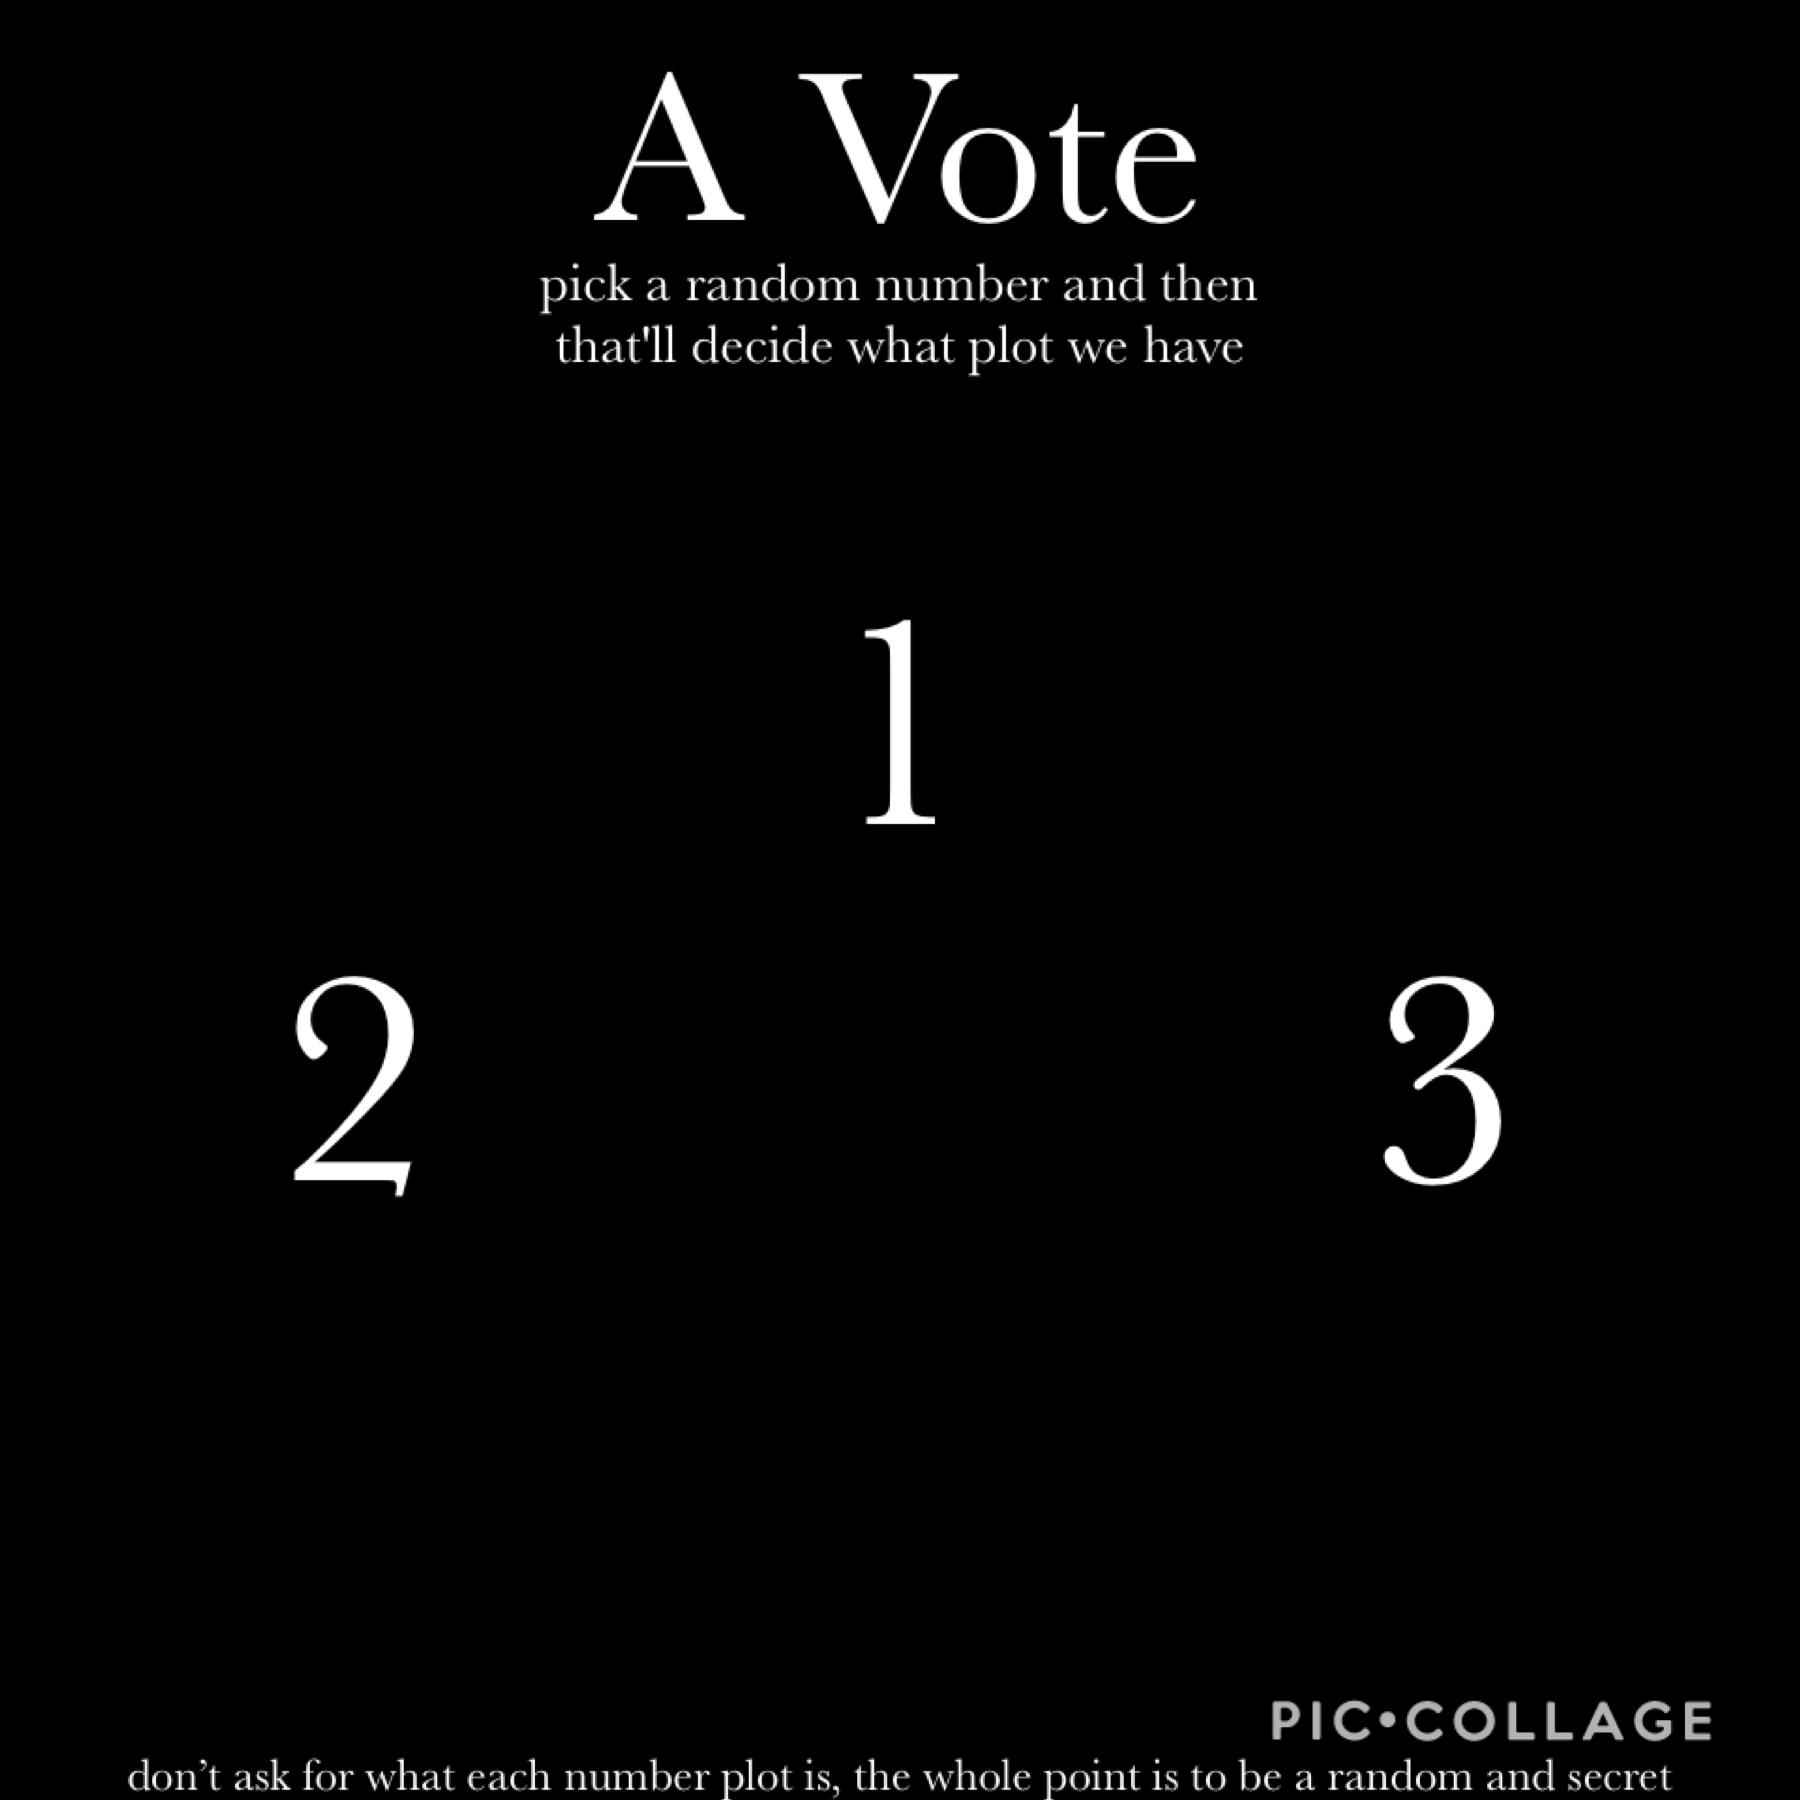 just circle a number for your vote and if you can’t remix just comment your choice bellow, the number with the most votes wins